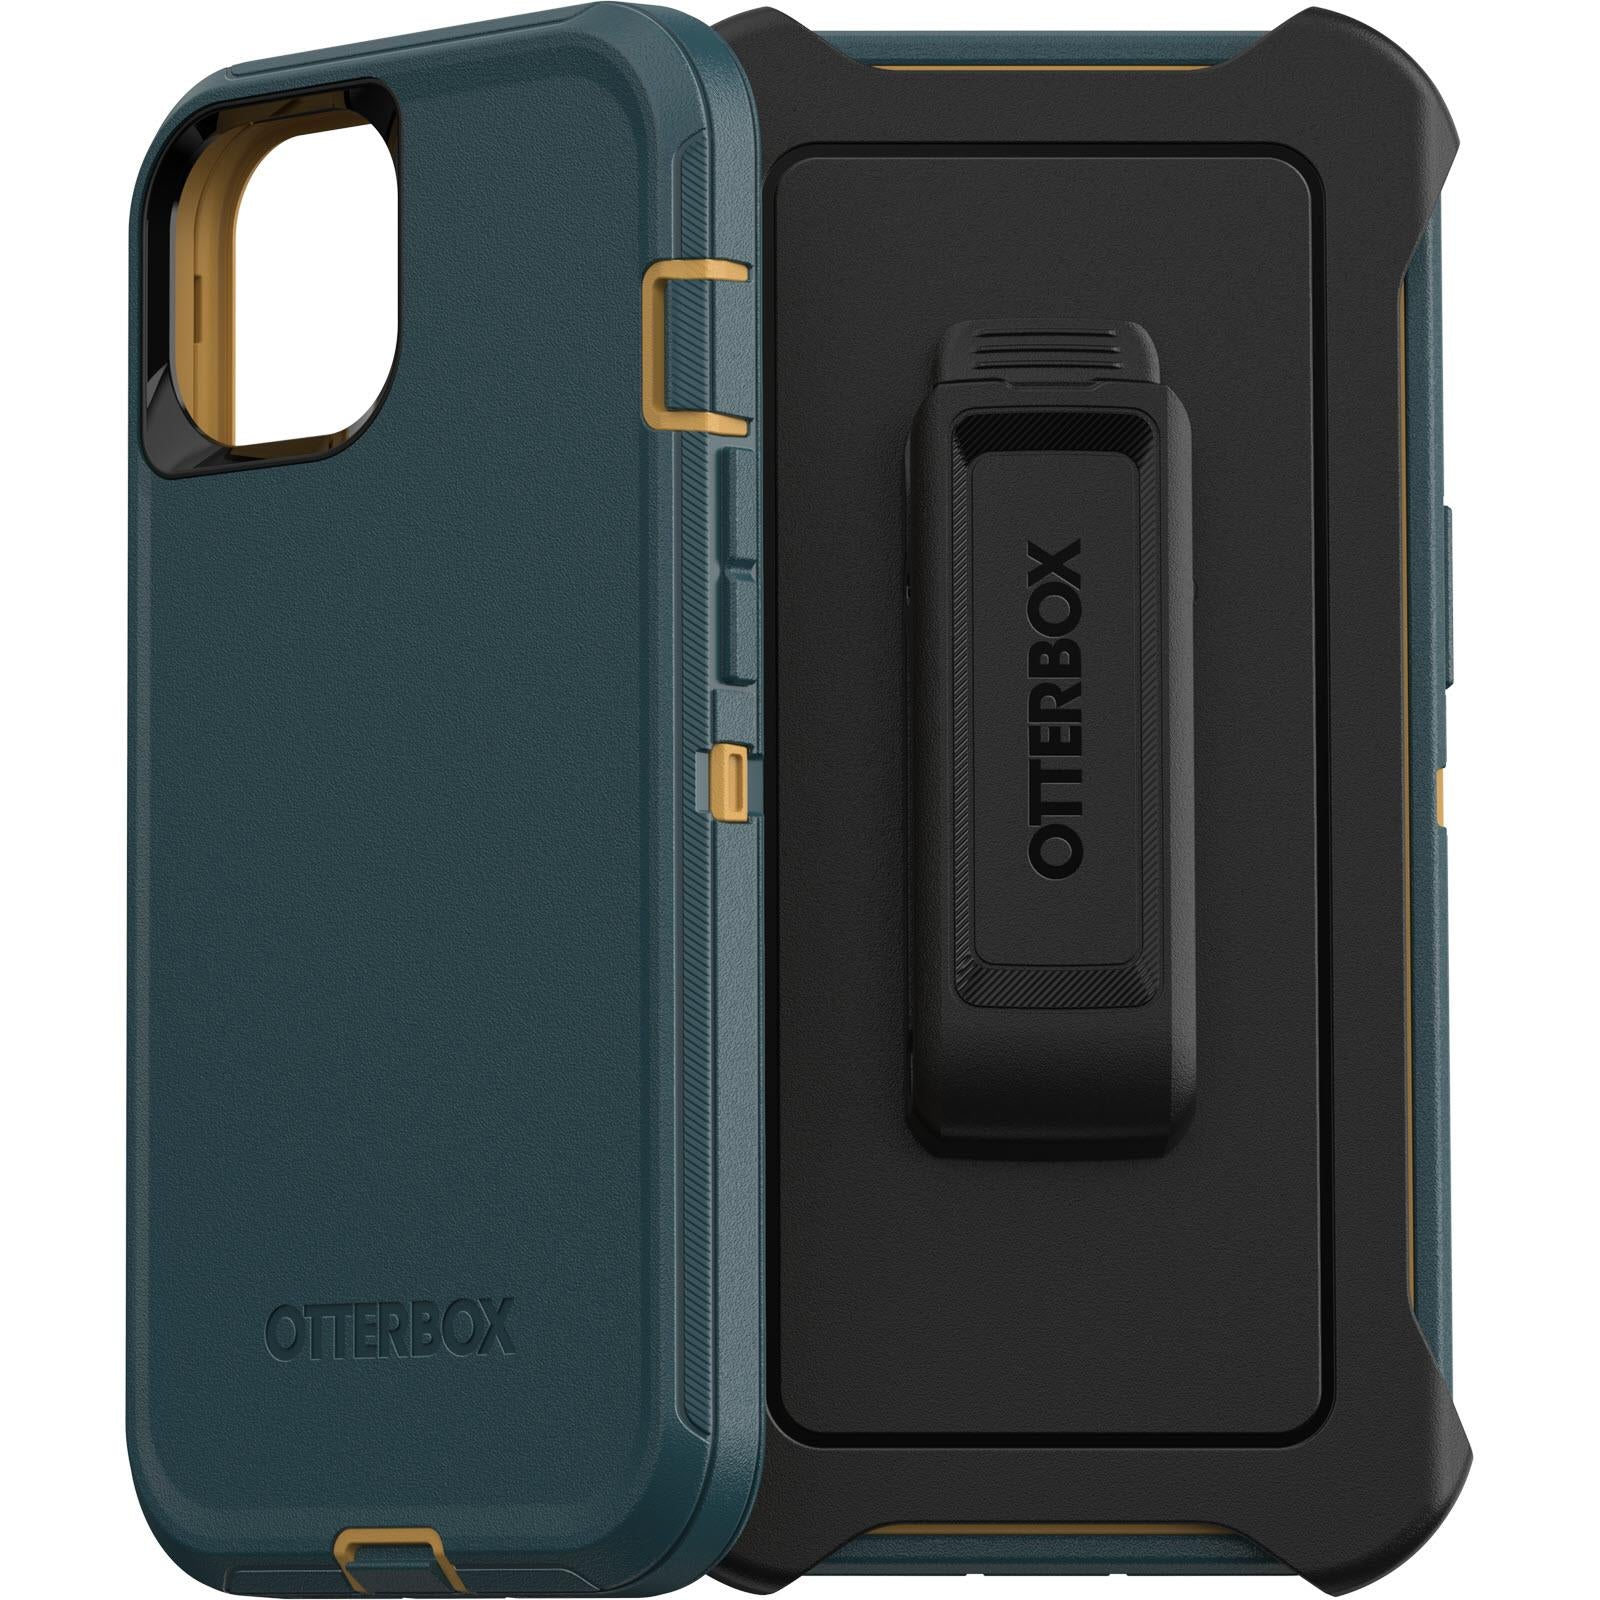 otterbox defender case for iphone 13 (hunter green)